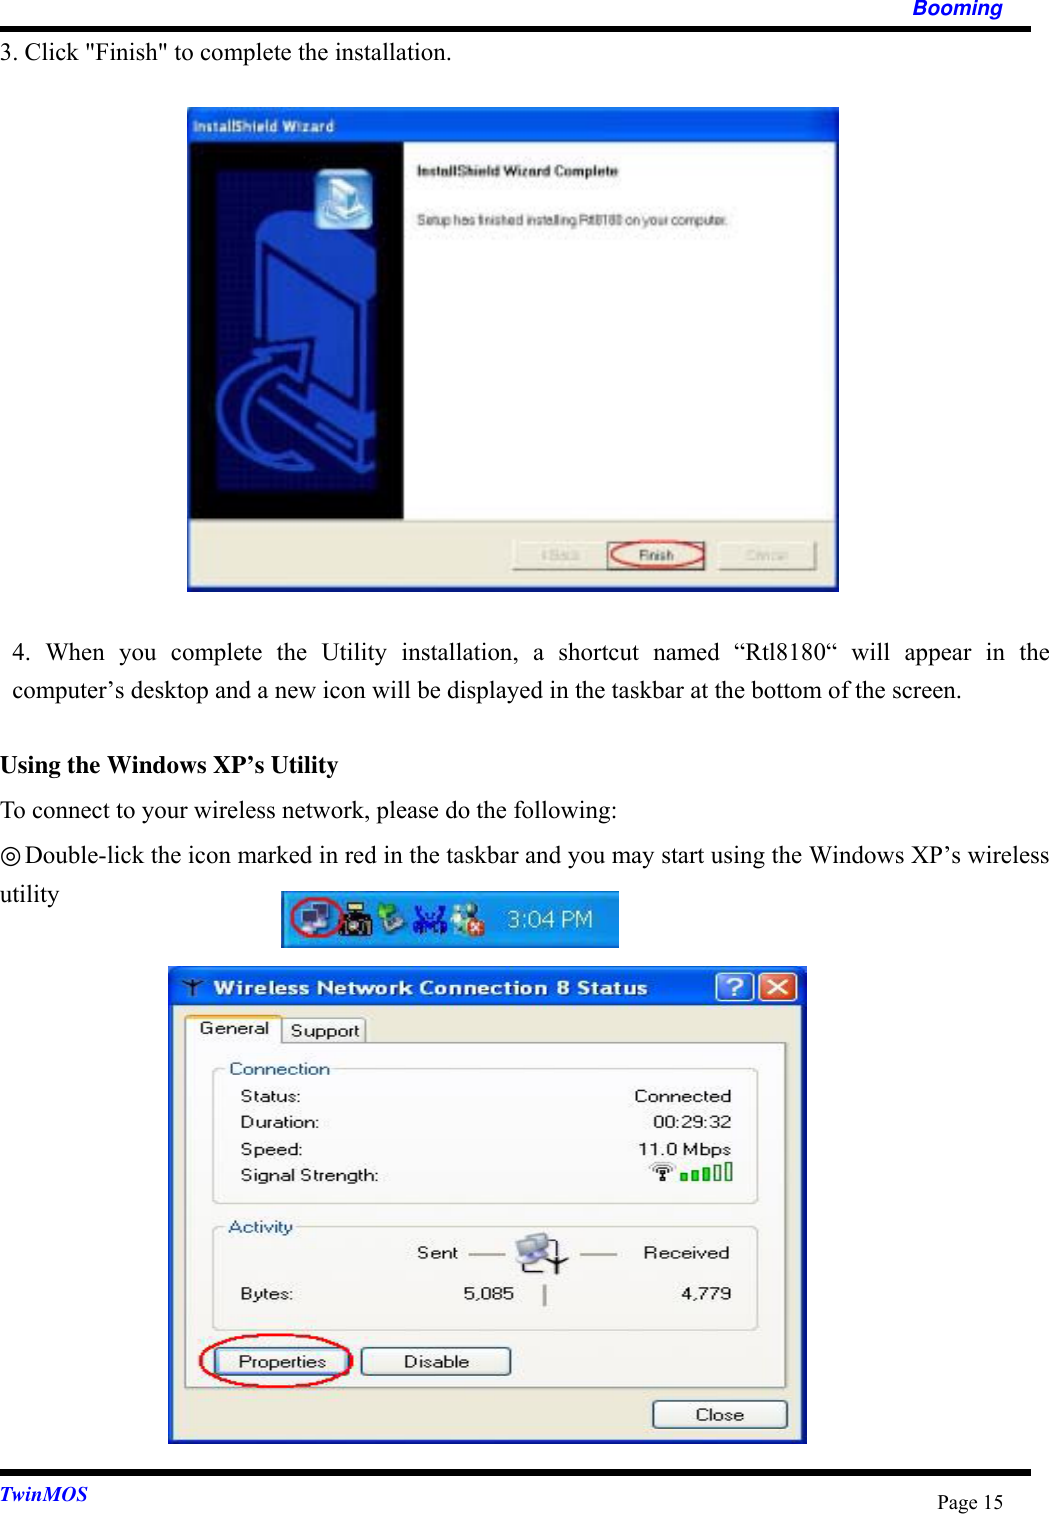   Booming  TwinMOS  Page 153. Click &quot;Finish&quot; to complete the installation.                4. When you complete the Utility installation, a shortcut named “Rtl8180“ will appear in the computer’s desktop and a new icon will be displayed in the taskbar at the bottom of the screen.    Using the Windows XP’s Utility To connect to your wireless network, please do the following: ◎Double-lick the icon marked in red in the taskbar and you may start using the Windows XP’s wireless utility              